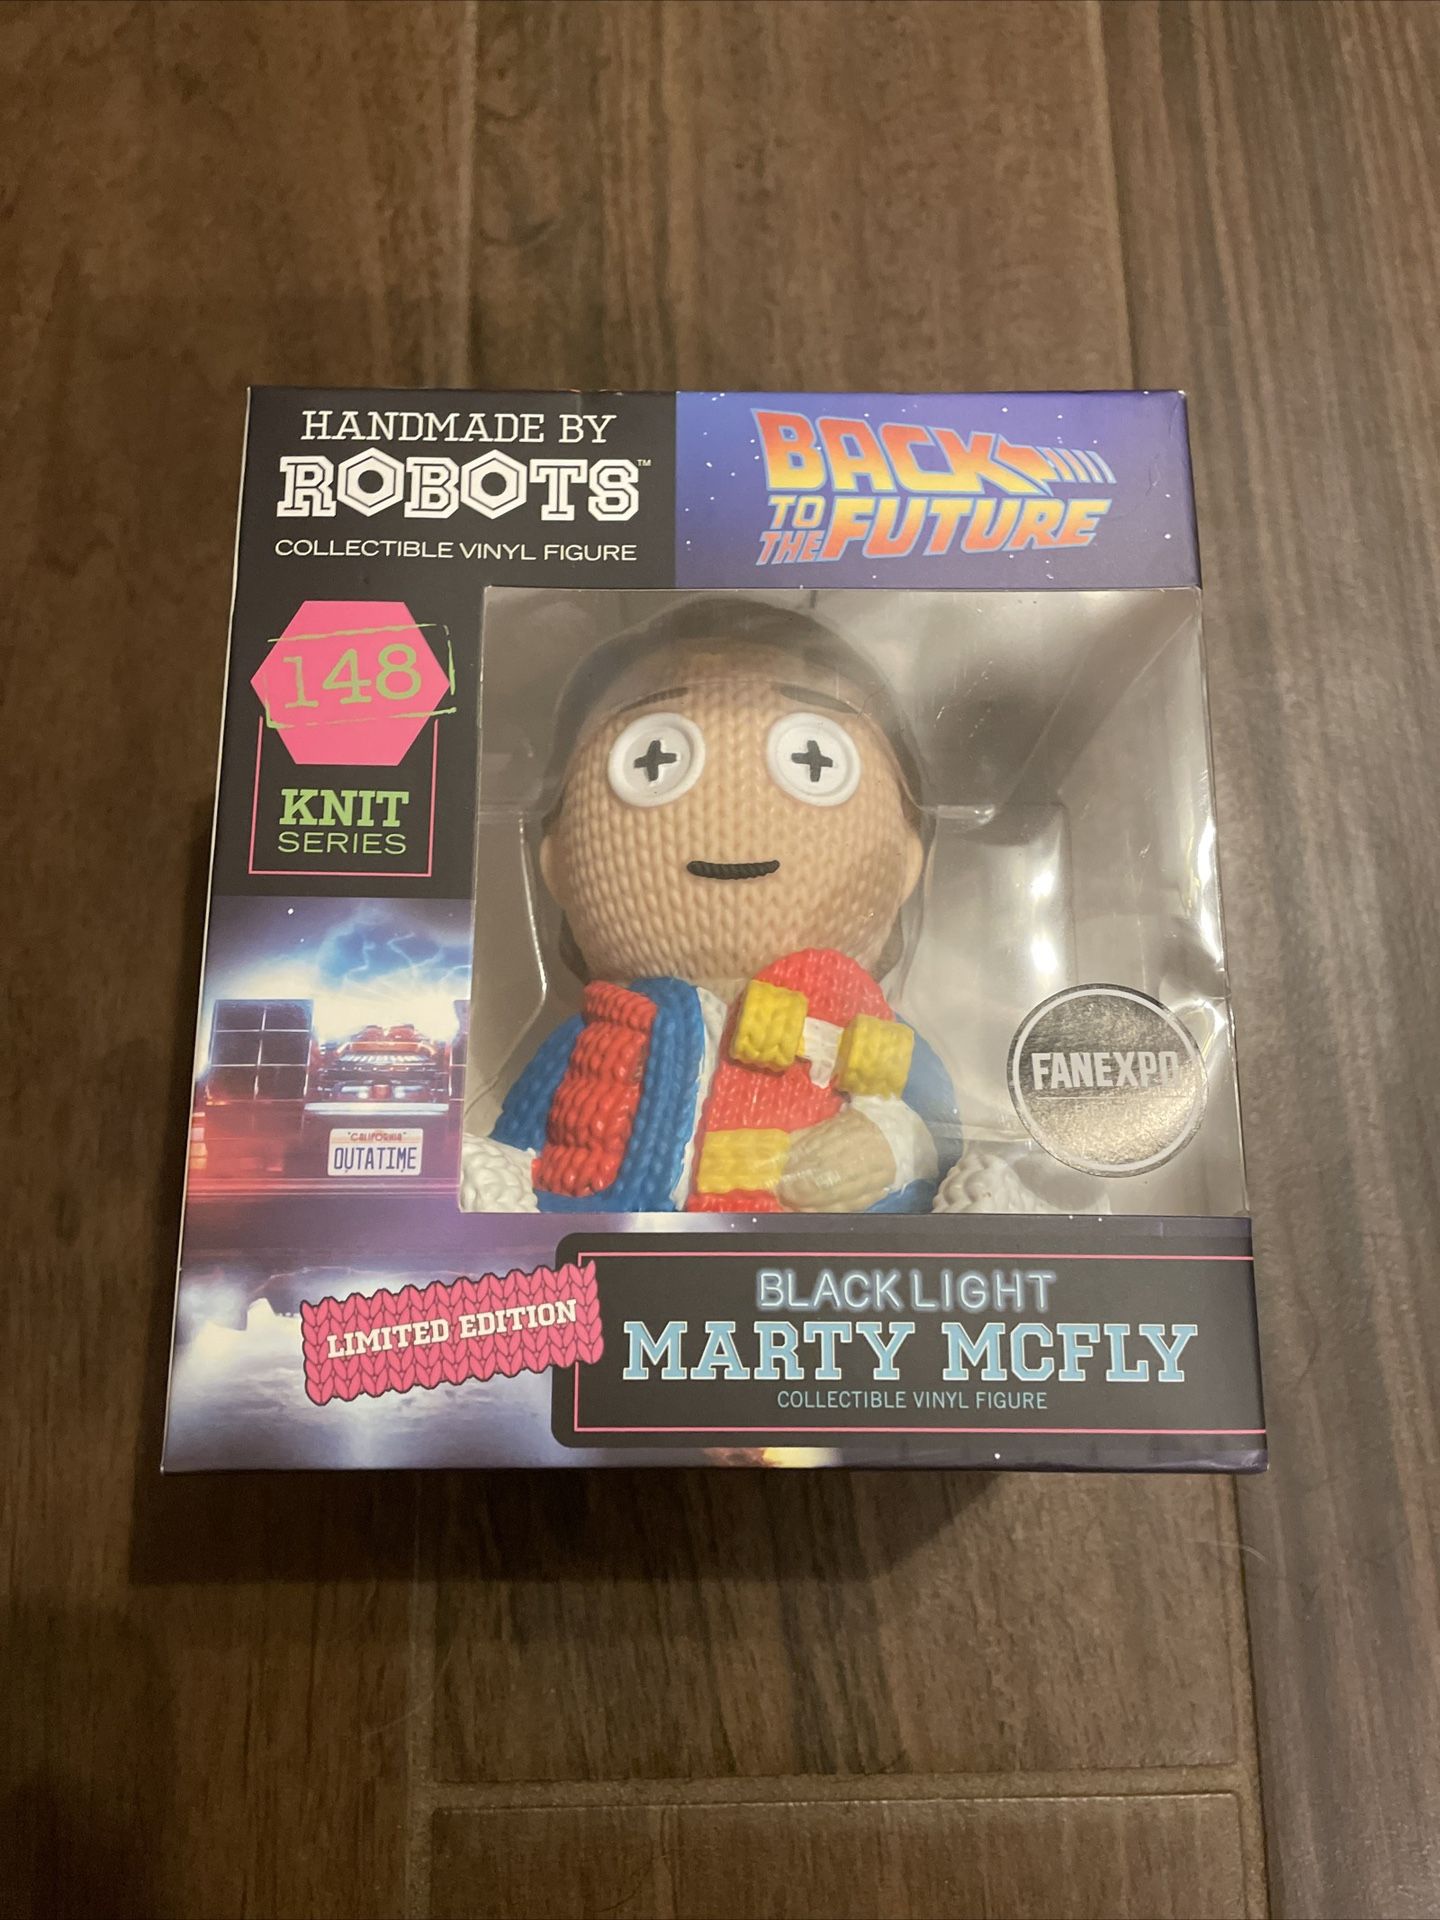 Handmade By Robots Marty McFly Black Light FANEXPO Limited Knit series #148